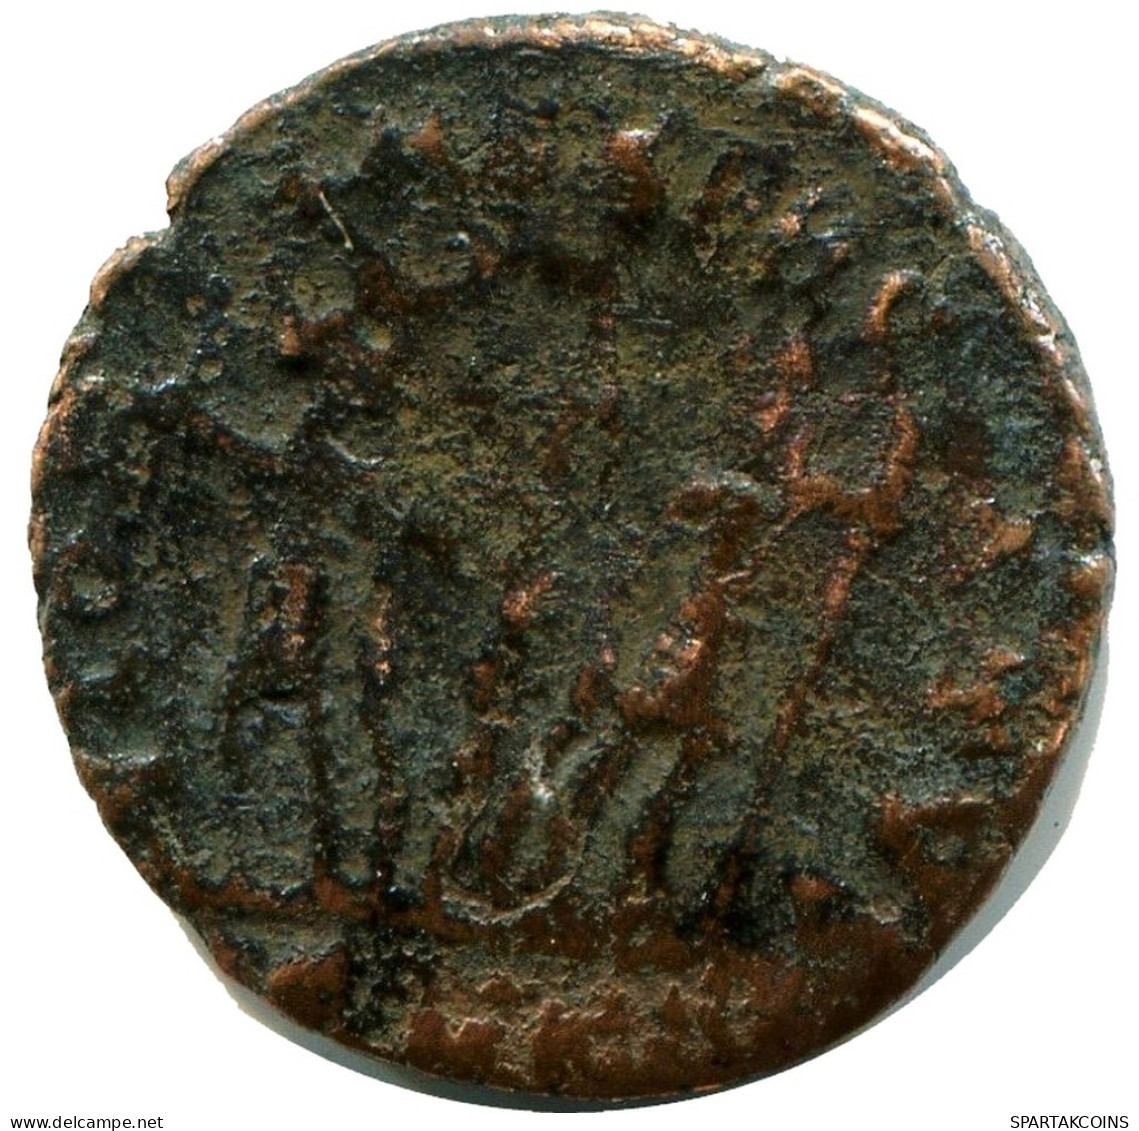 CONSTANS MINTED IN CYZICUS FROM THE ROYAL ONTARIO MUSEUM #ANC11659.14.F.A - L'Empire Chrétien (307 à 363)